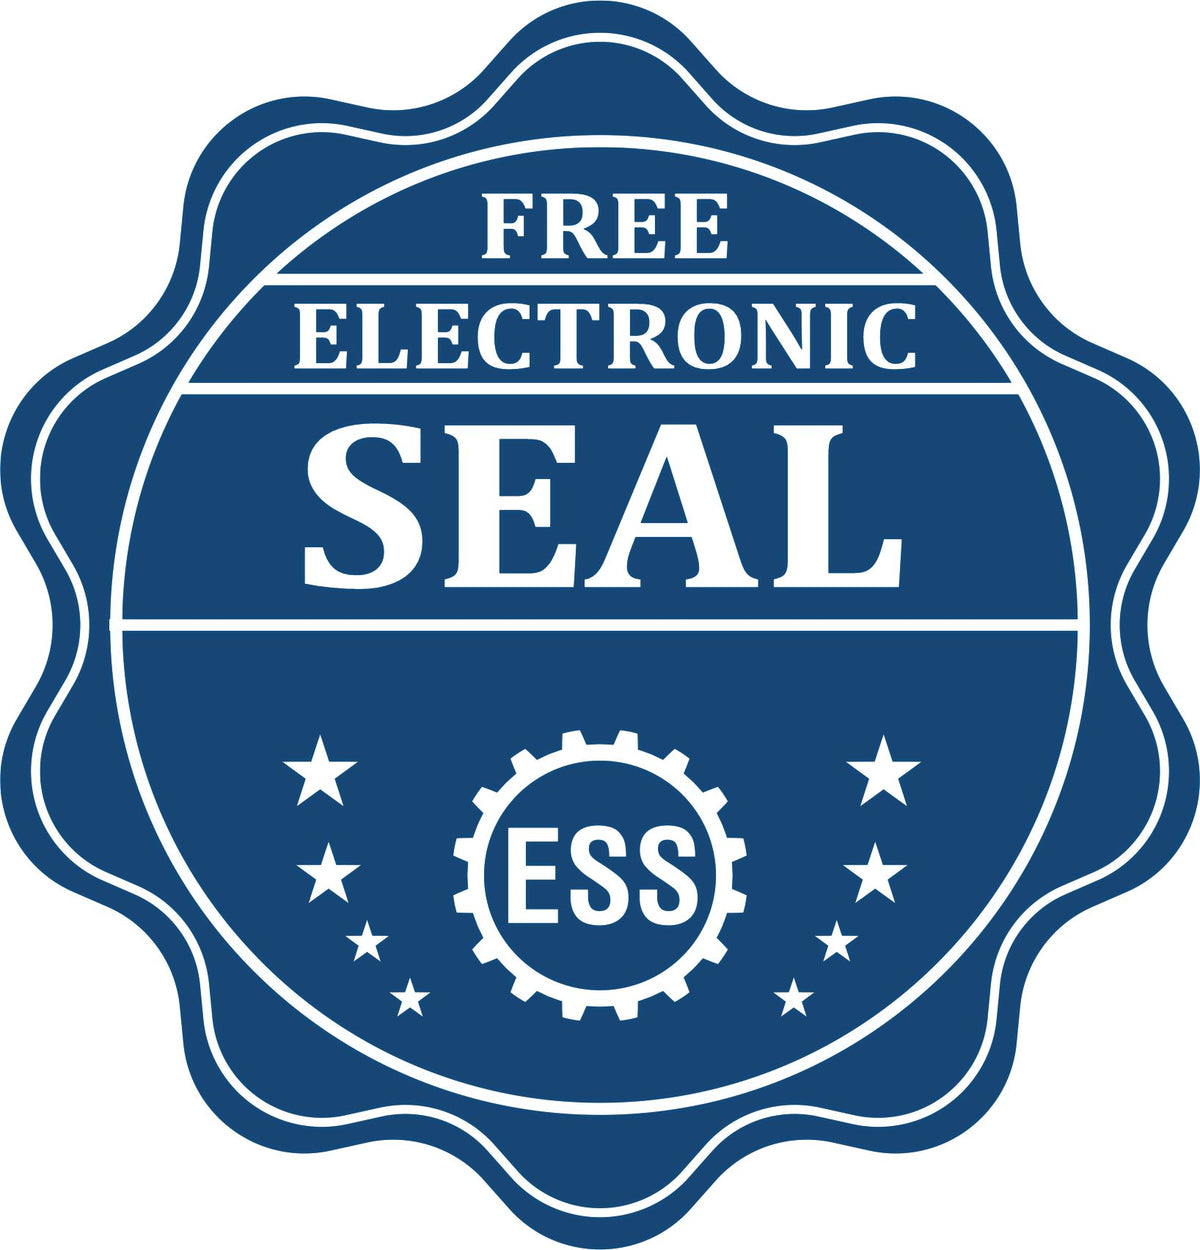 A badge showing a free electronic seal for the Handheld Kentucky Professional Engineer Embosser with stars and the ESS gear on the emblem.